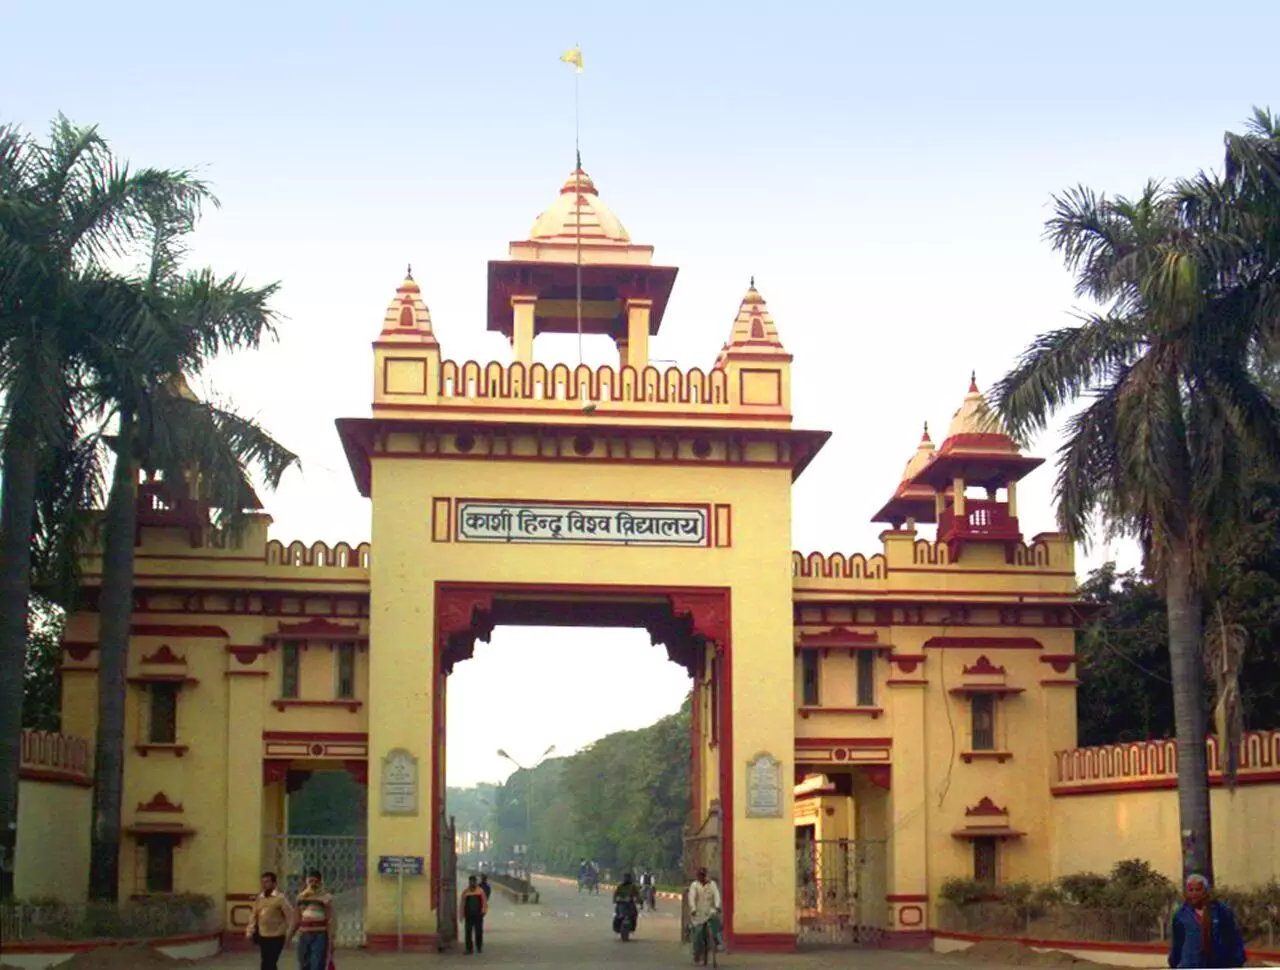 Preparations of 102nd convocation of BHU in full swing convocation will be held 10 dec